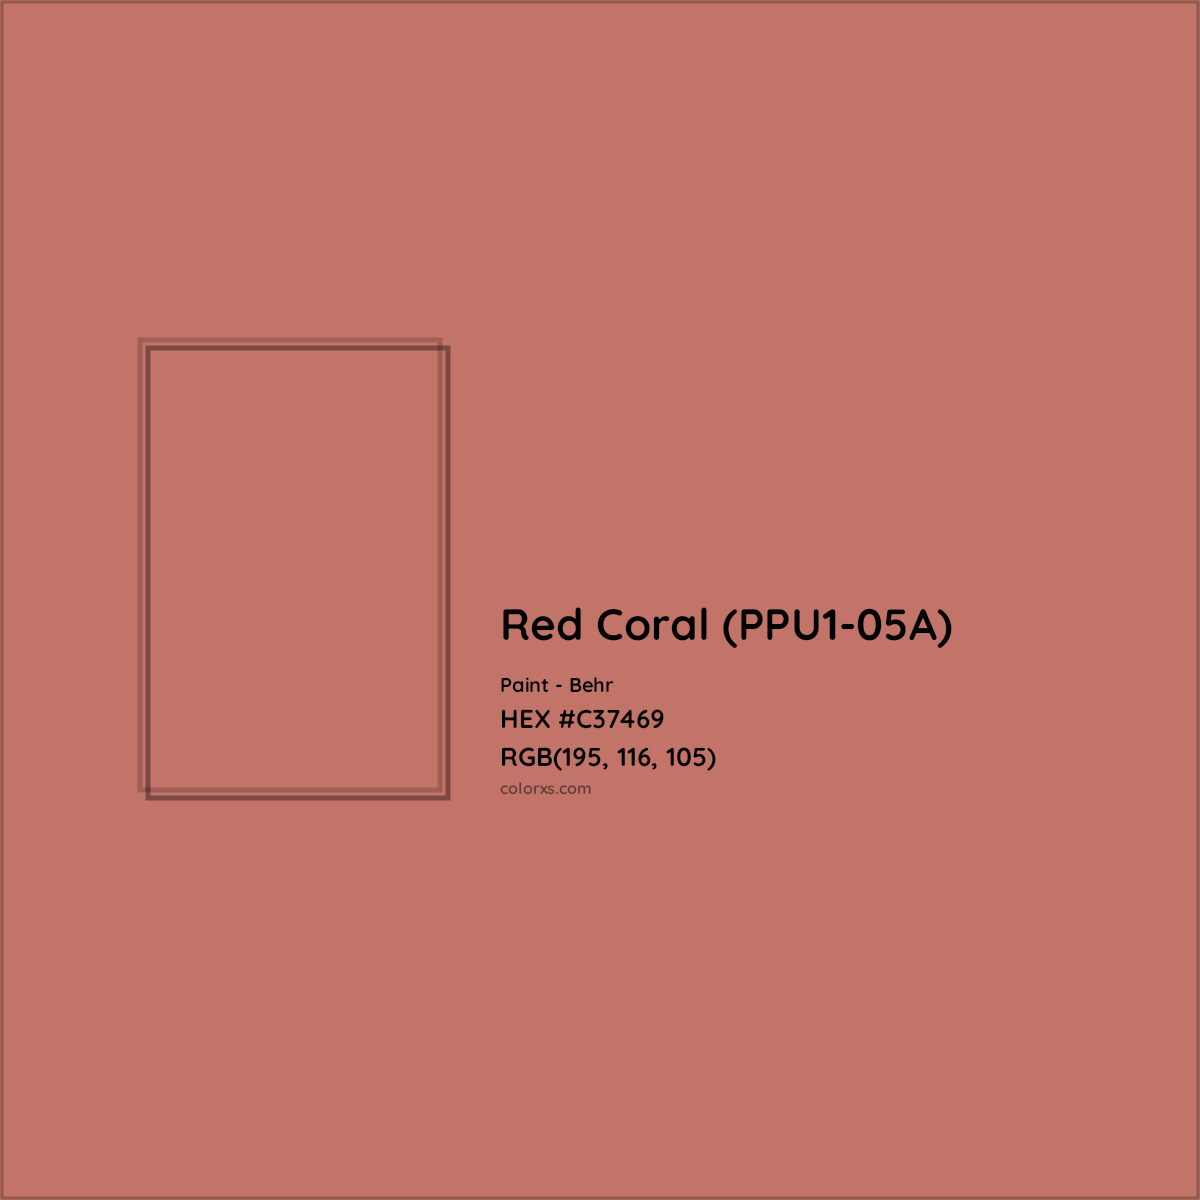 HEX #C37469 Red Coral (PPU1-05A) Paint Behr - Color Code